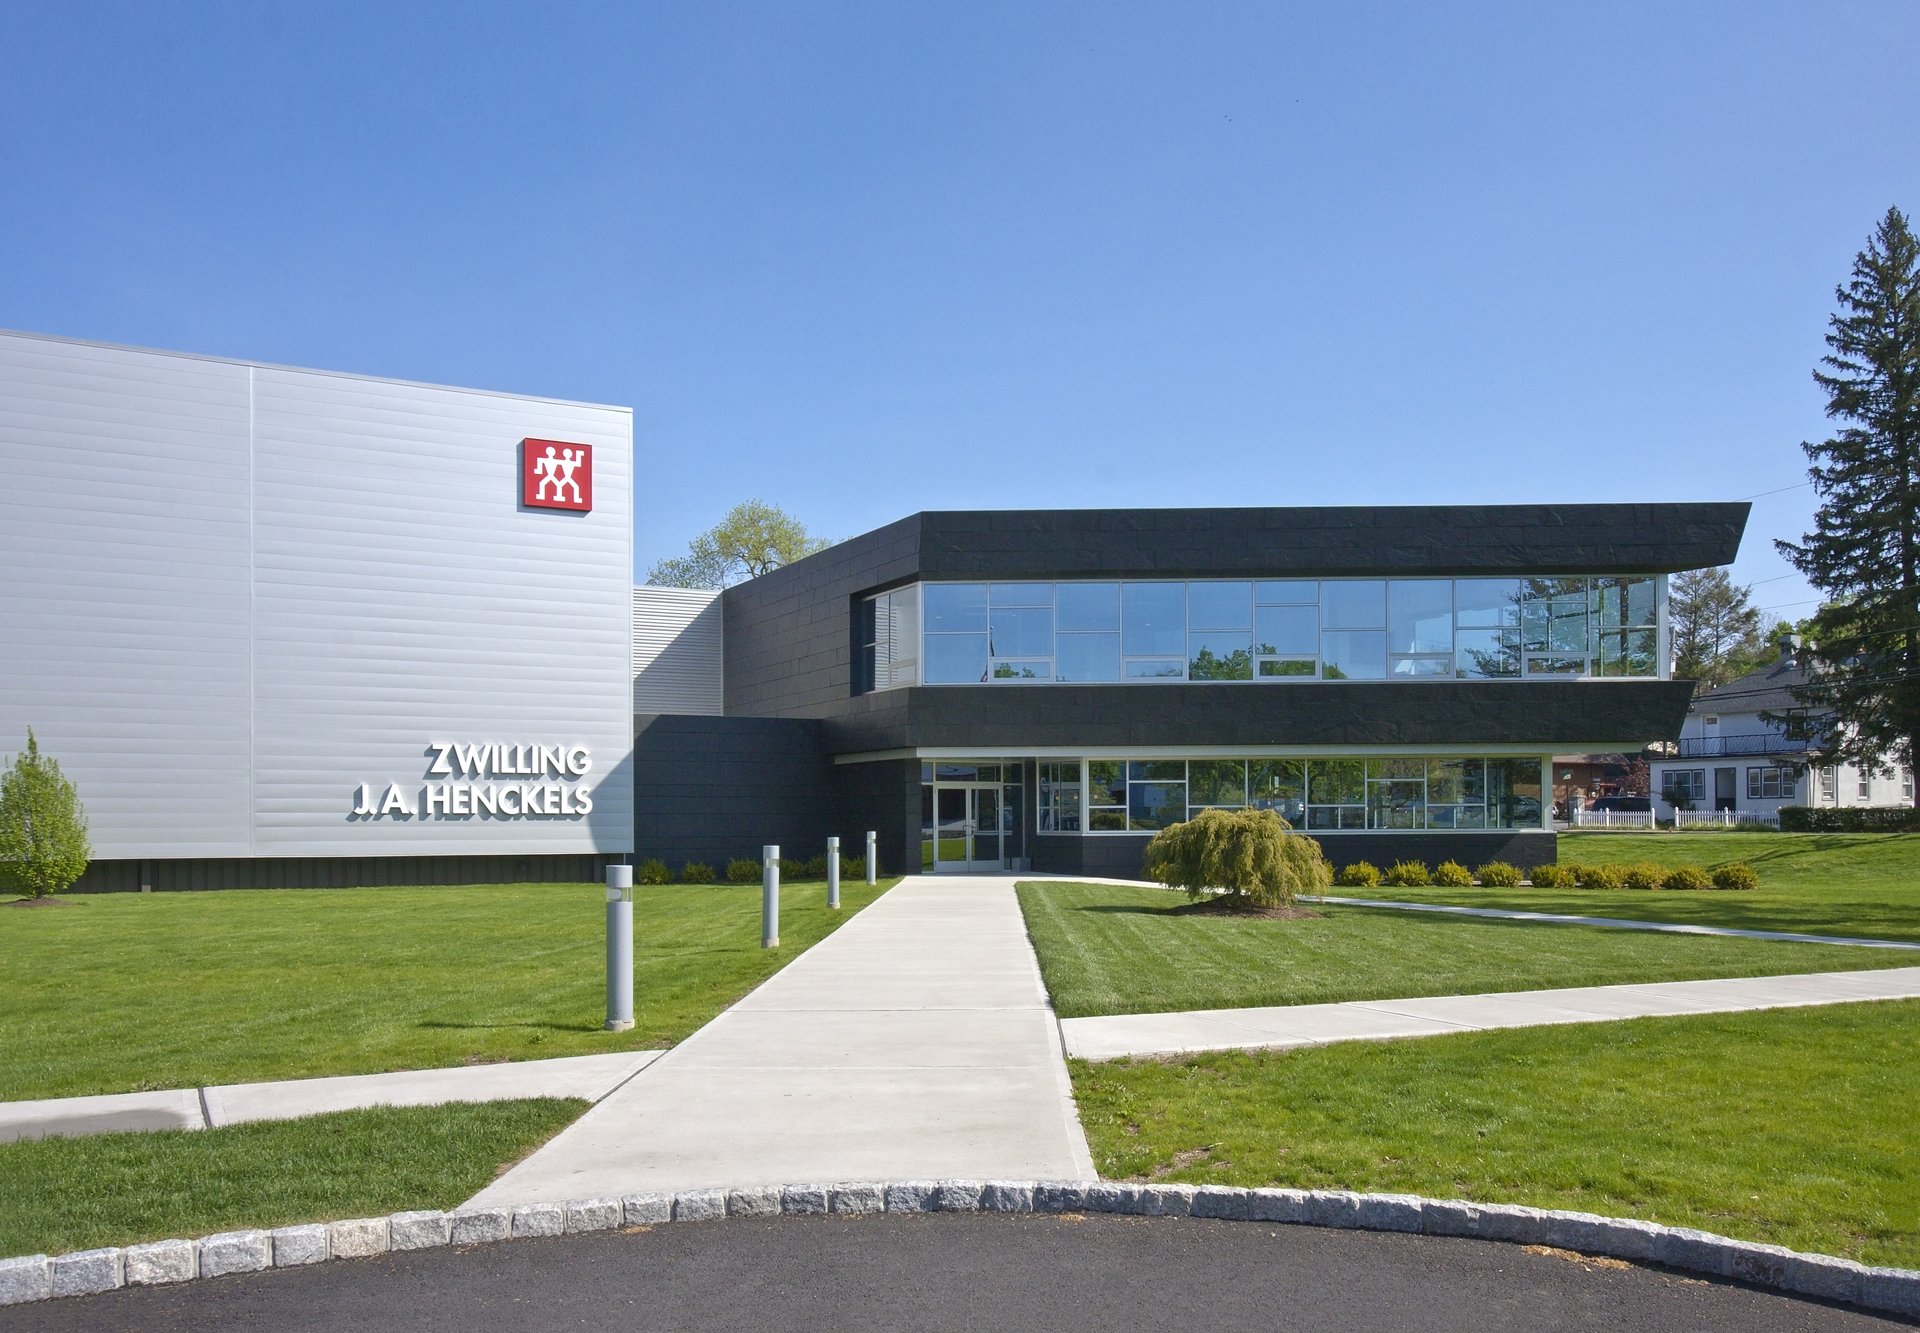 https://gb-ds.com/wp-content/gallery/zwilling-j-a-henckels-usa-headquarters/Zwilling-Exterior_S.jpg